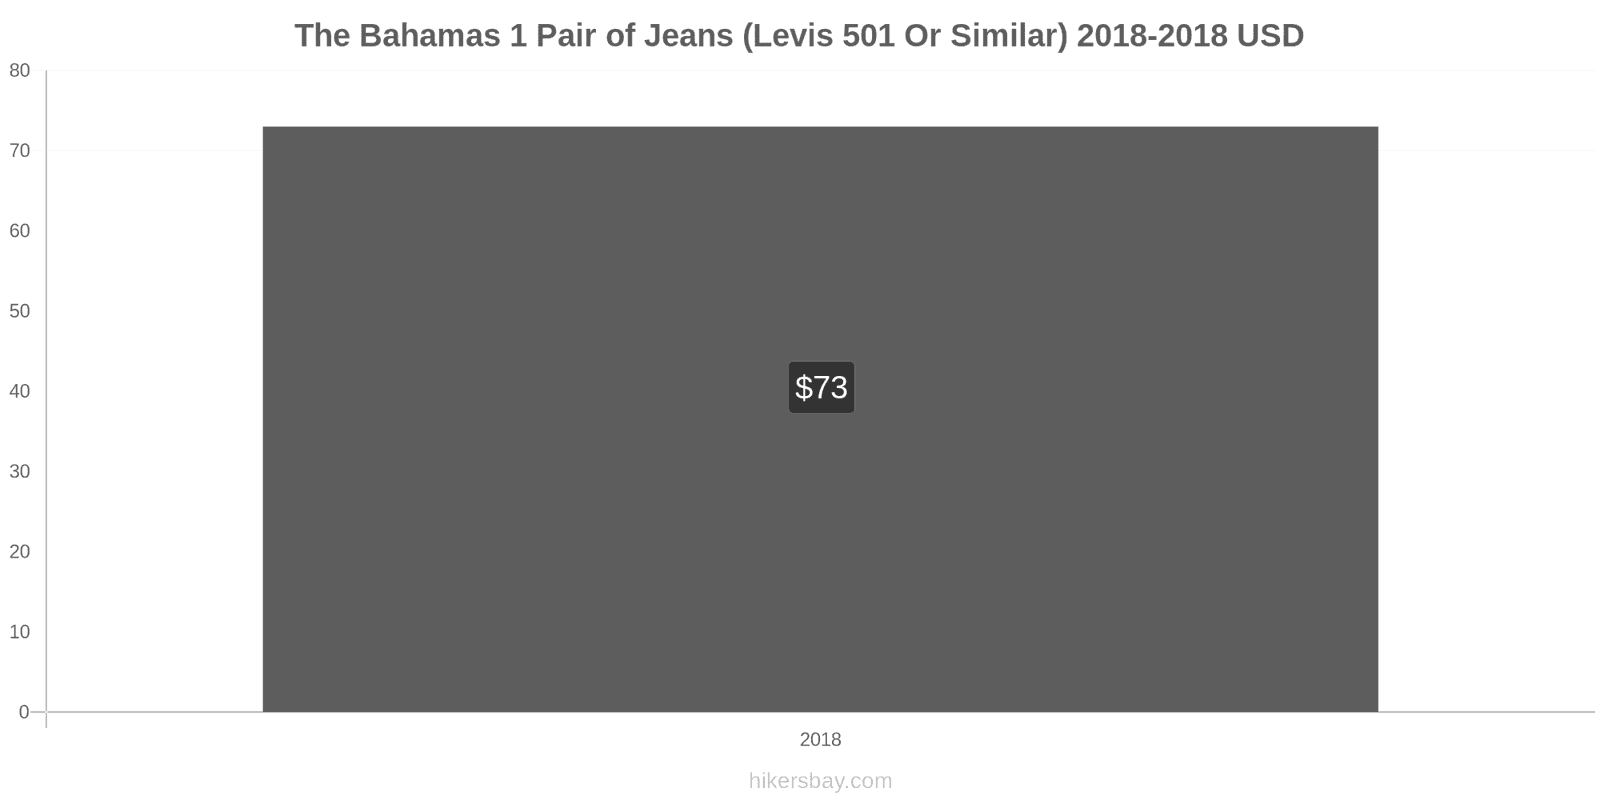 The Bahamas price changes 1 pair of jeans (Levis 501 or similar) hikersbay.com